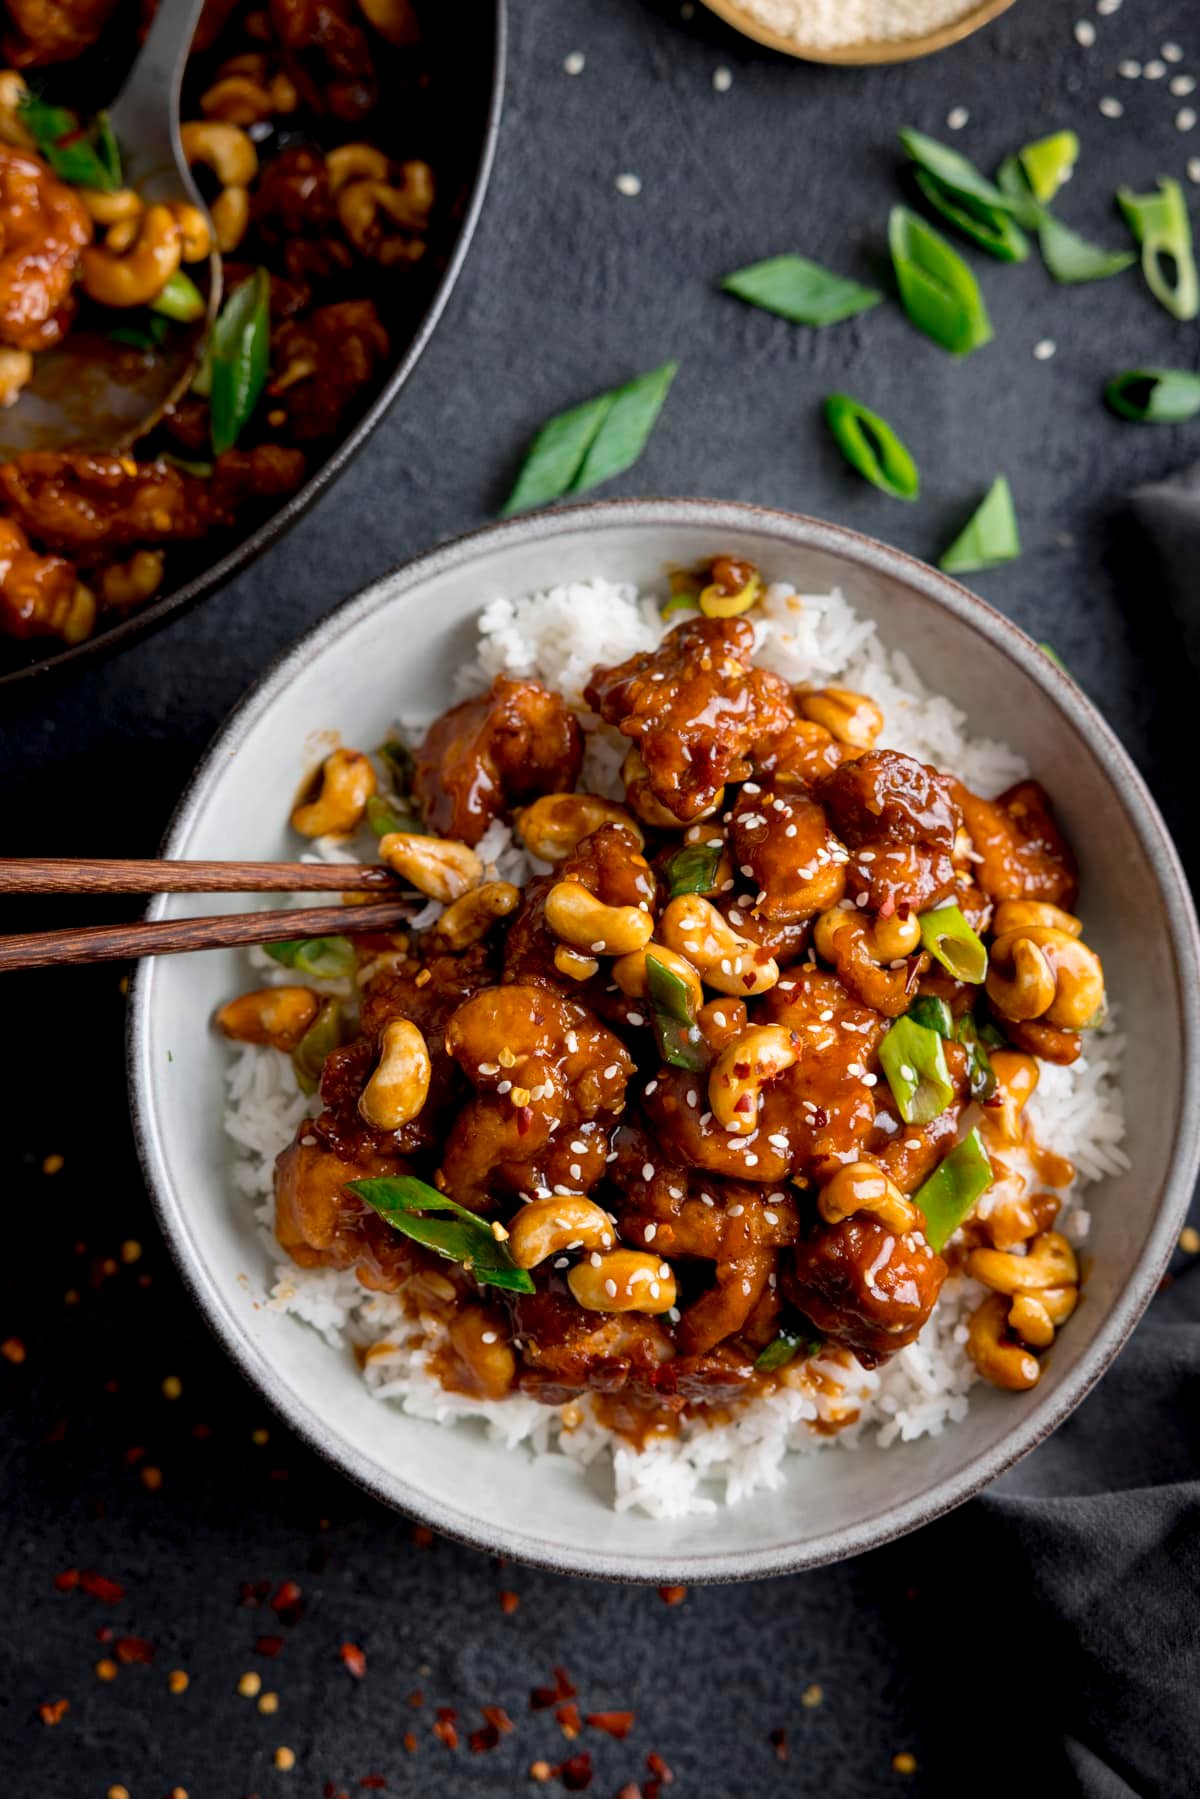 Overhead of sticky cashew chicken with rice in a white bowl on a dark background. There are chopsticks sticking out of the bowl. The pan of cashew chicken is in shot and there are chopped spring onions sprinkled around.